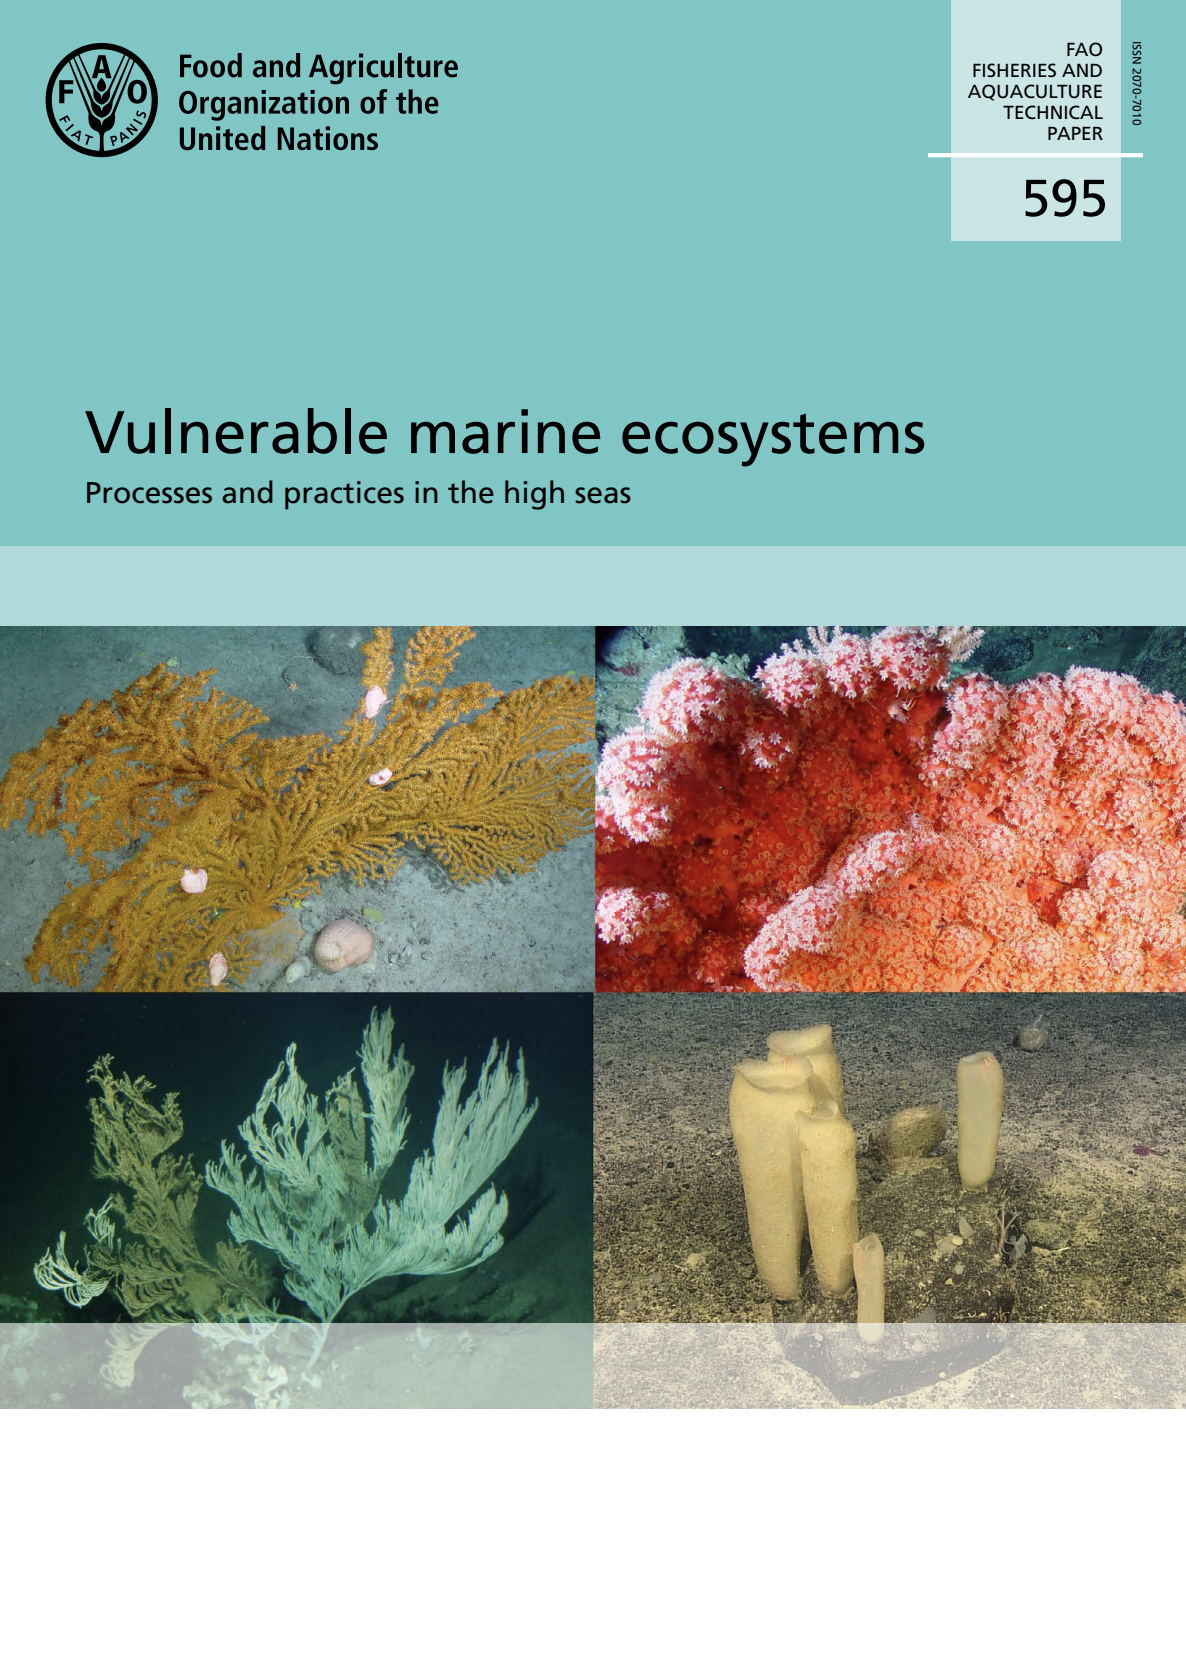 Vulnerable marine ecosystems: Processes and practices in the high seas